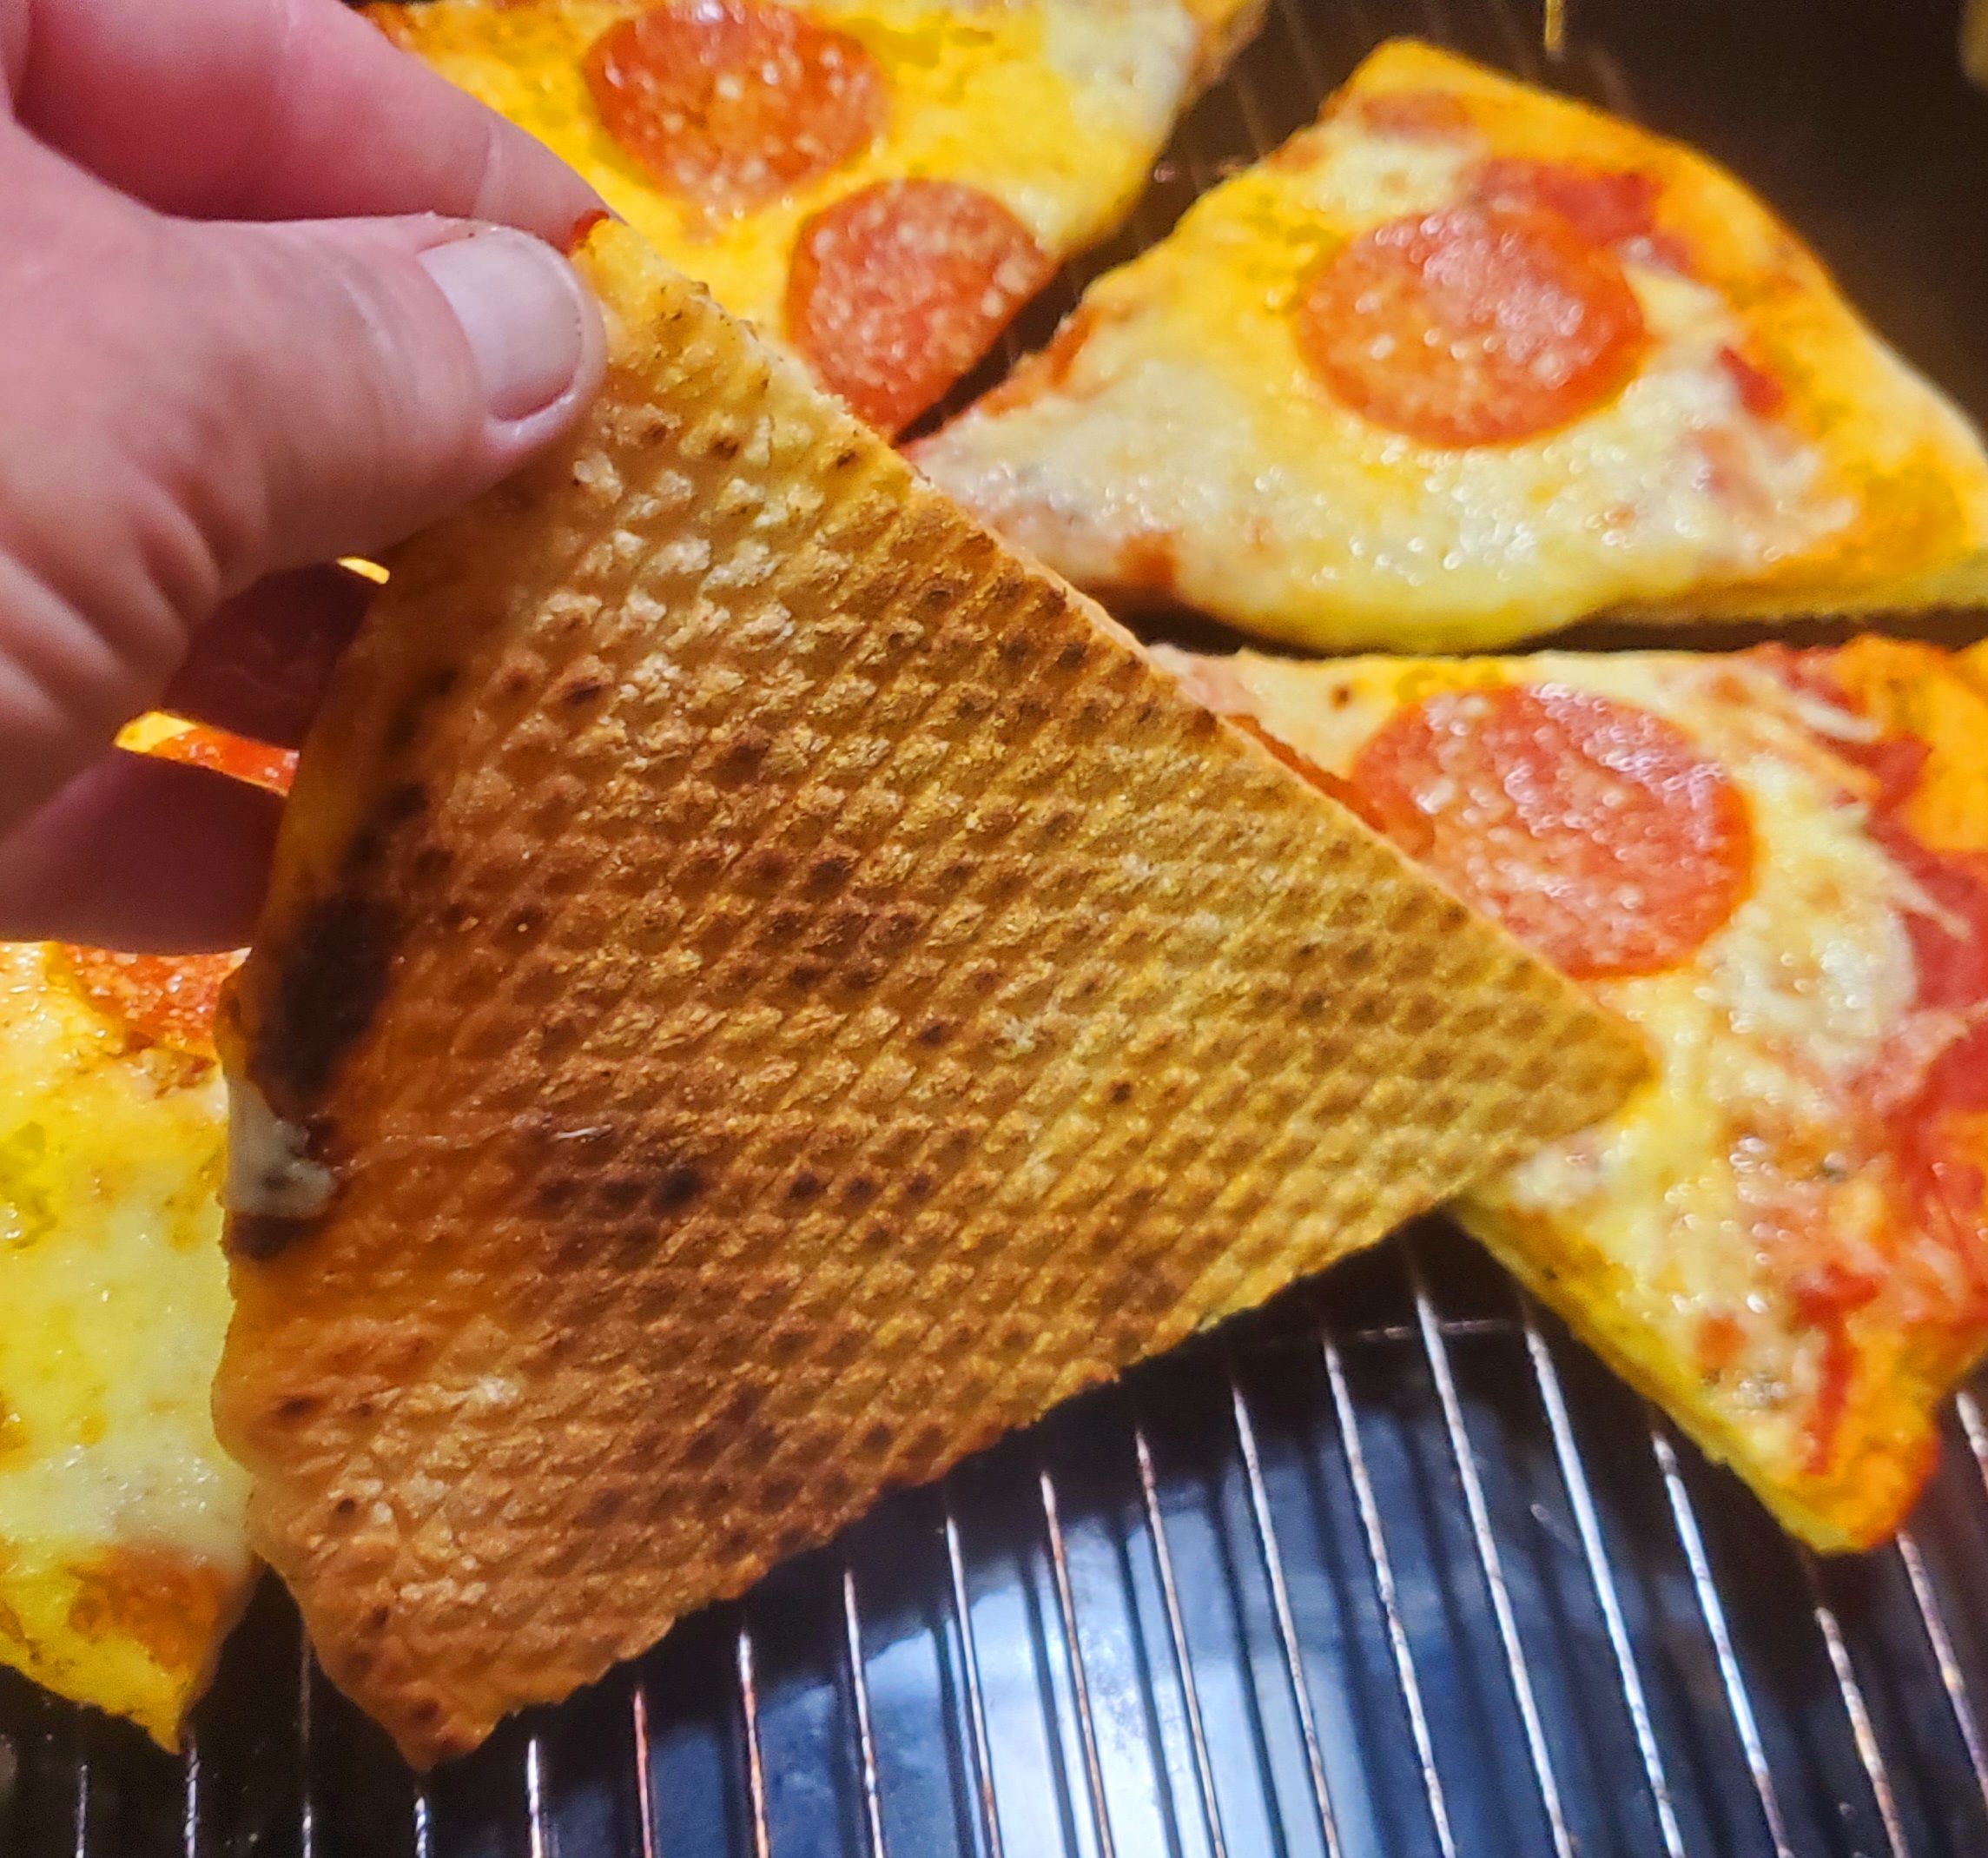 Using a pizza screen to start because I'm not a pizzaolla.